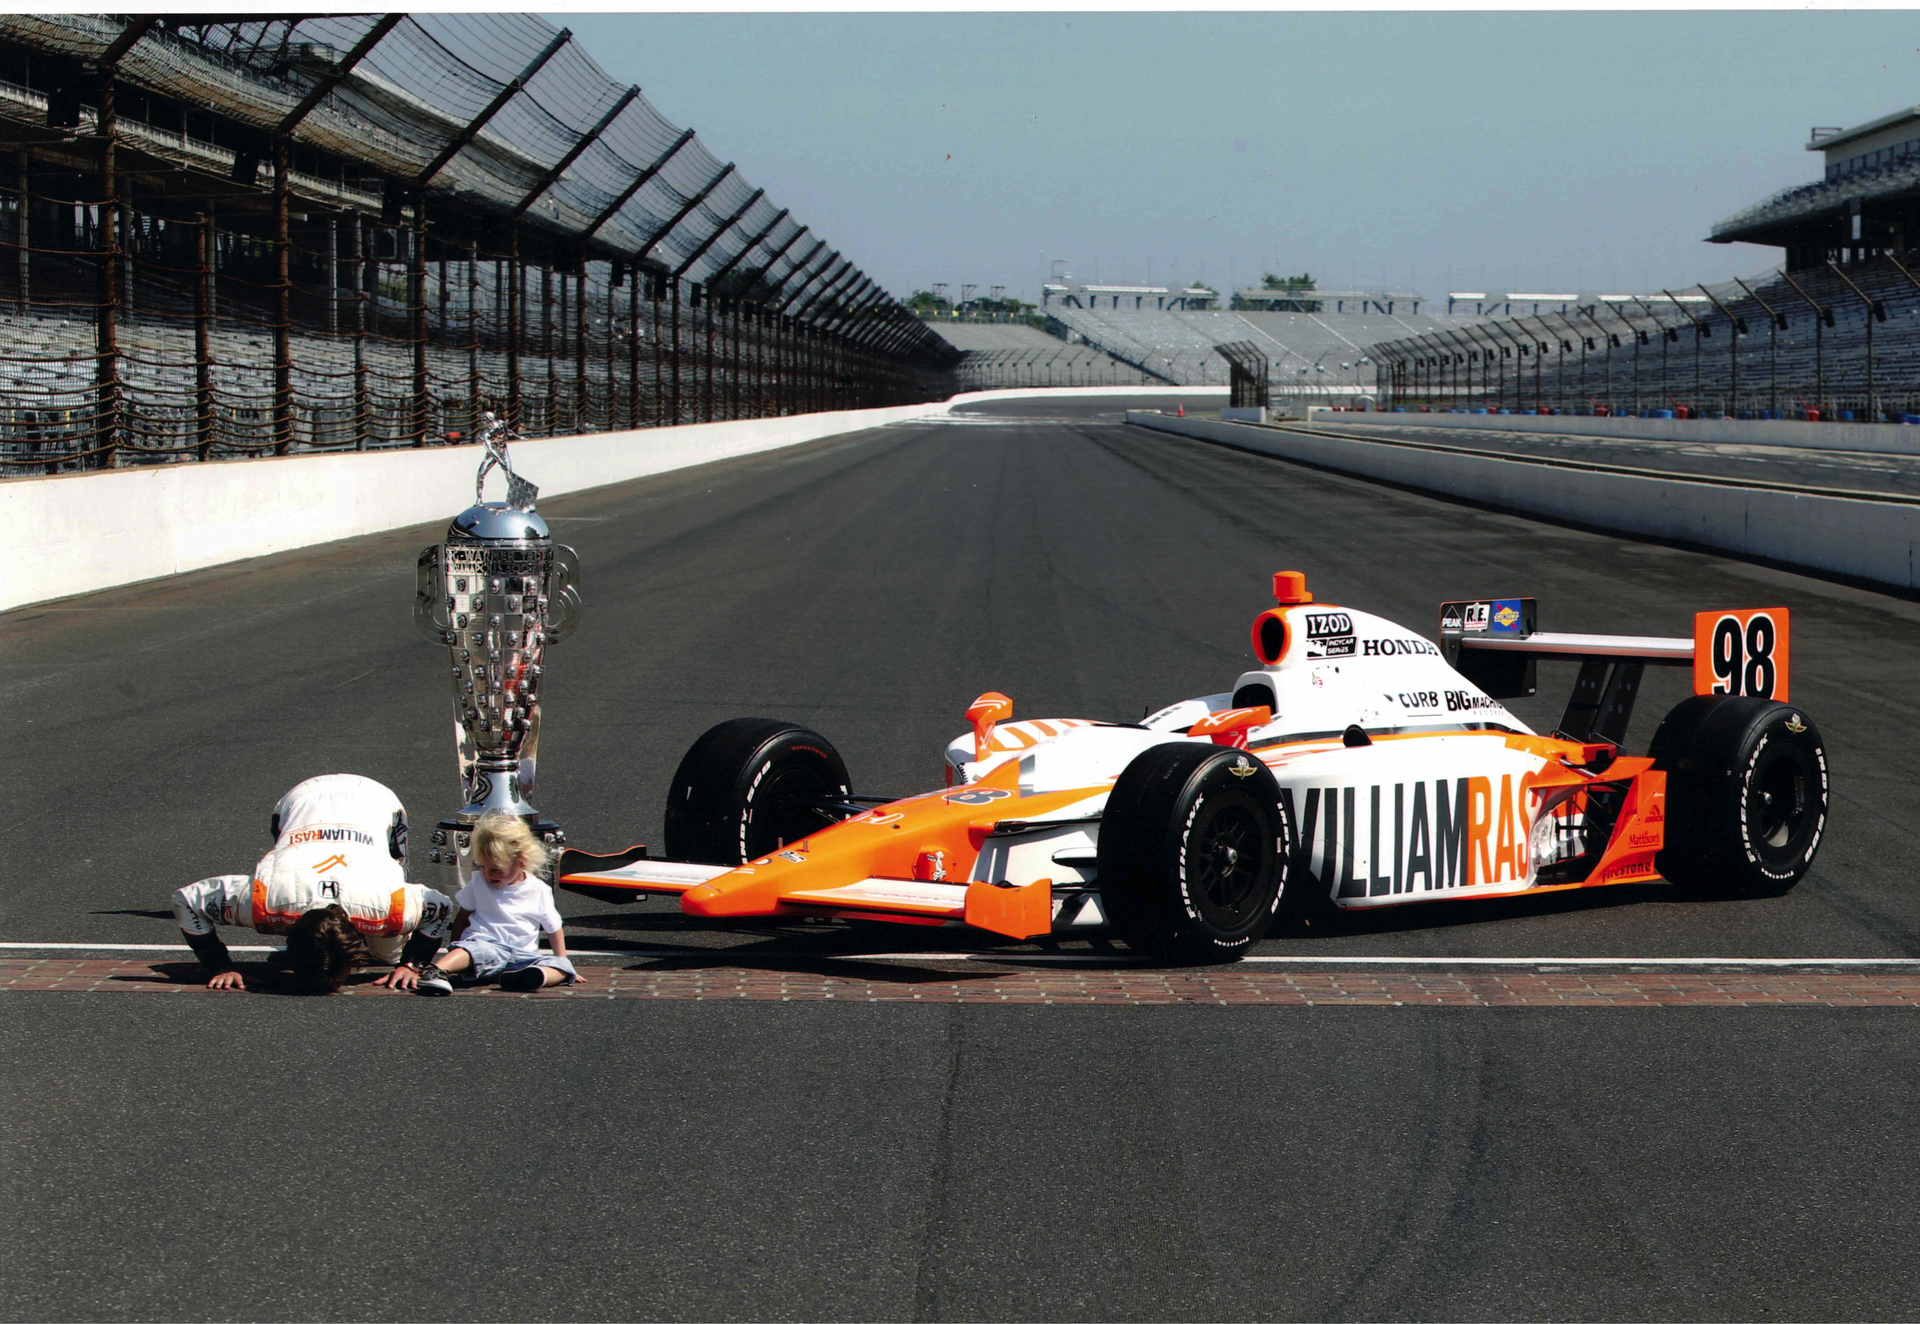 a man (dan wheldon) bows to the camera as his young son (sebastian wheldon) sits next to him on a racetrack; the pair are to the left of a large silver trophy and an orange and black race car